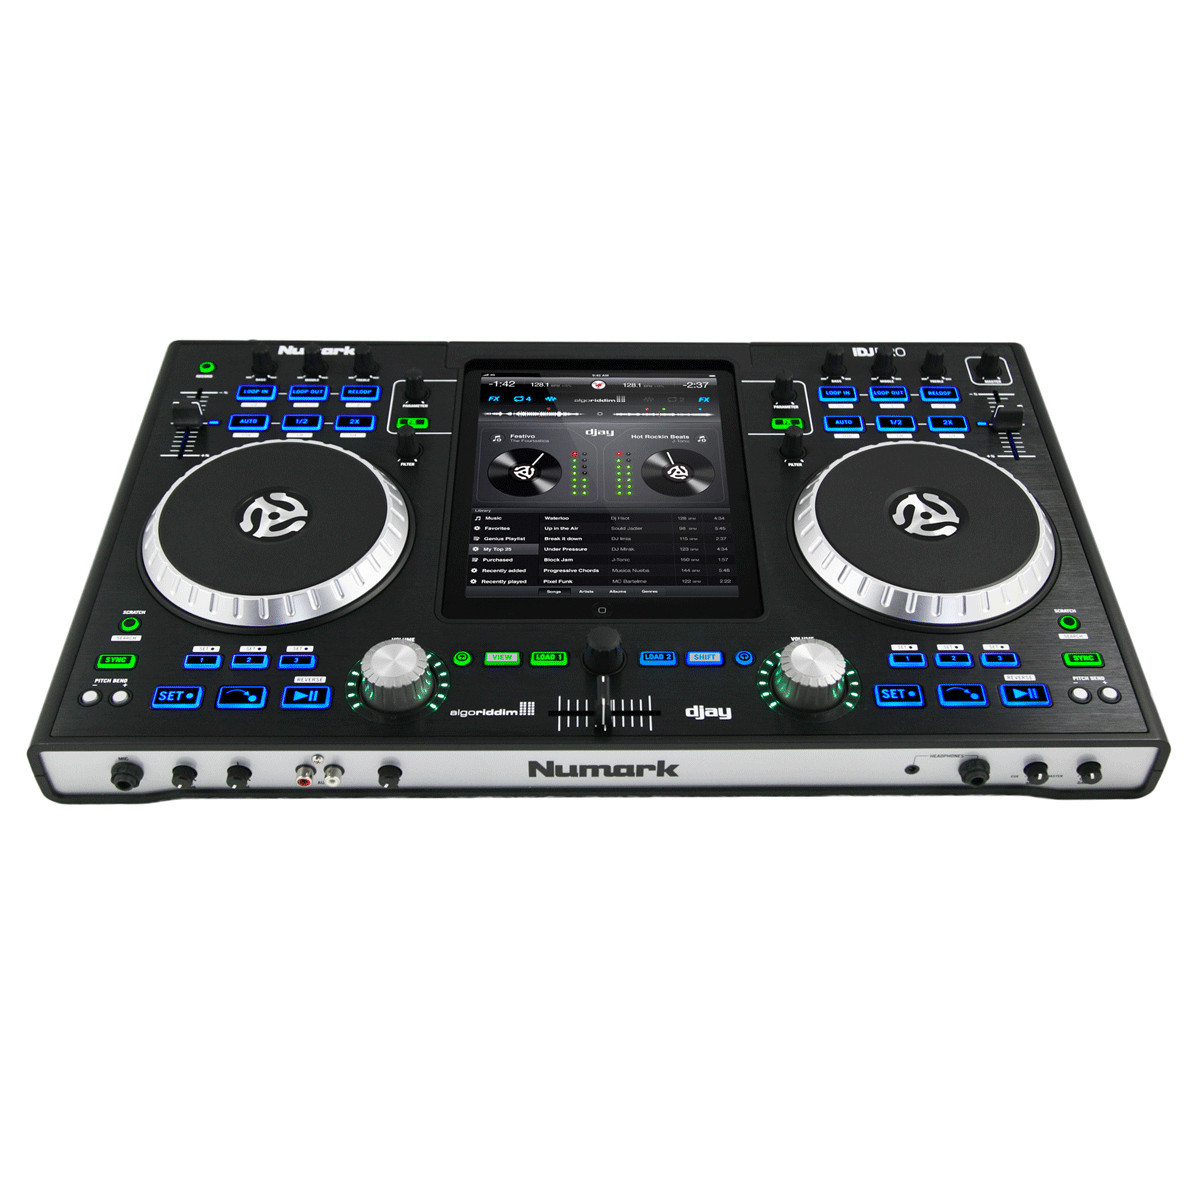 Dj controller compatible with djay app